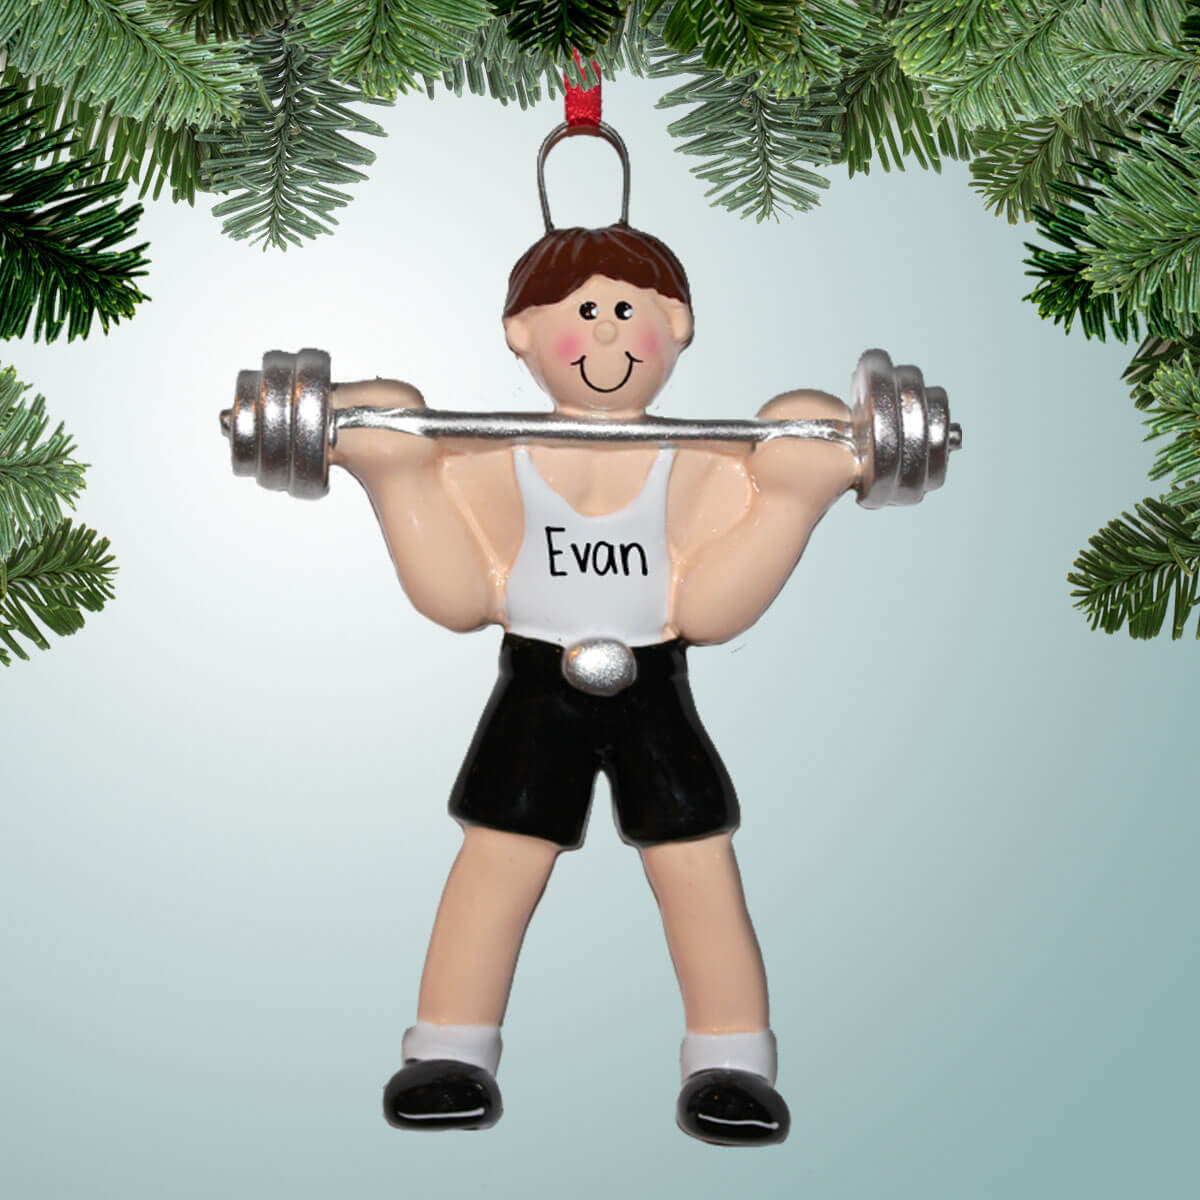 Gym Lover Gift Gym Is My New Girlfriend Workout Ornament by Jeff Creation -  Pixels